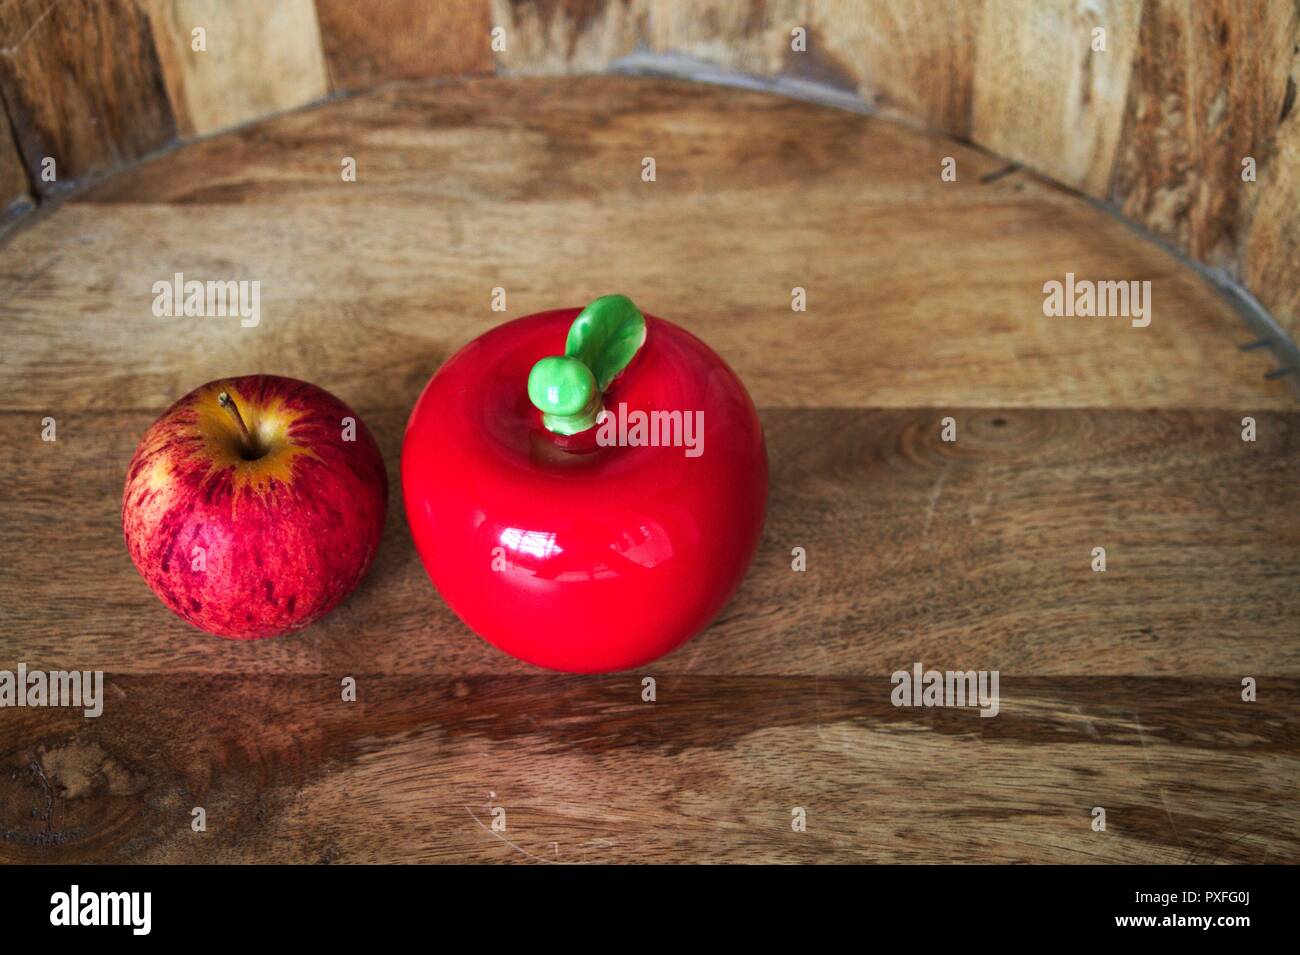 Two red apples, fake and real against a wooden background. Stock Photo